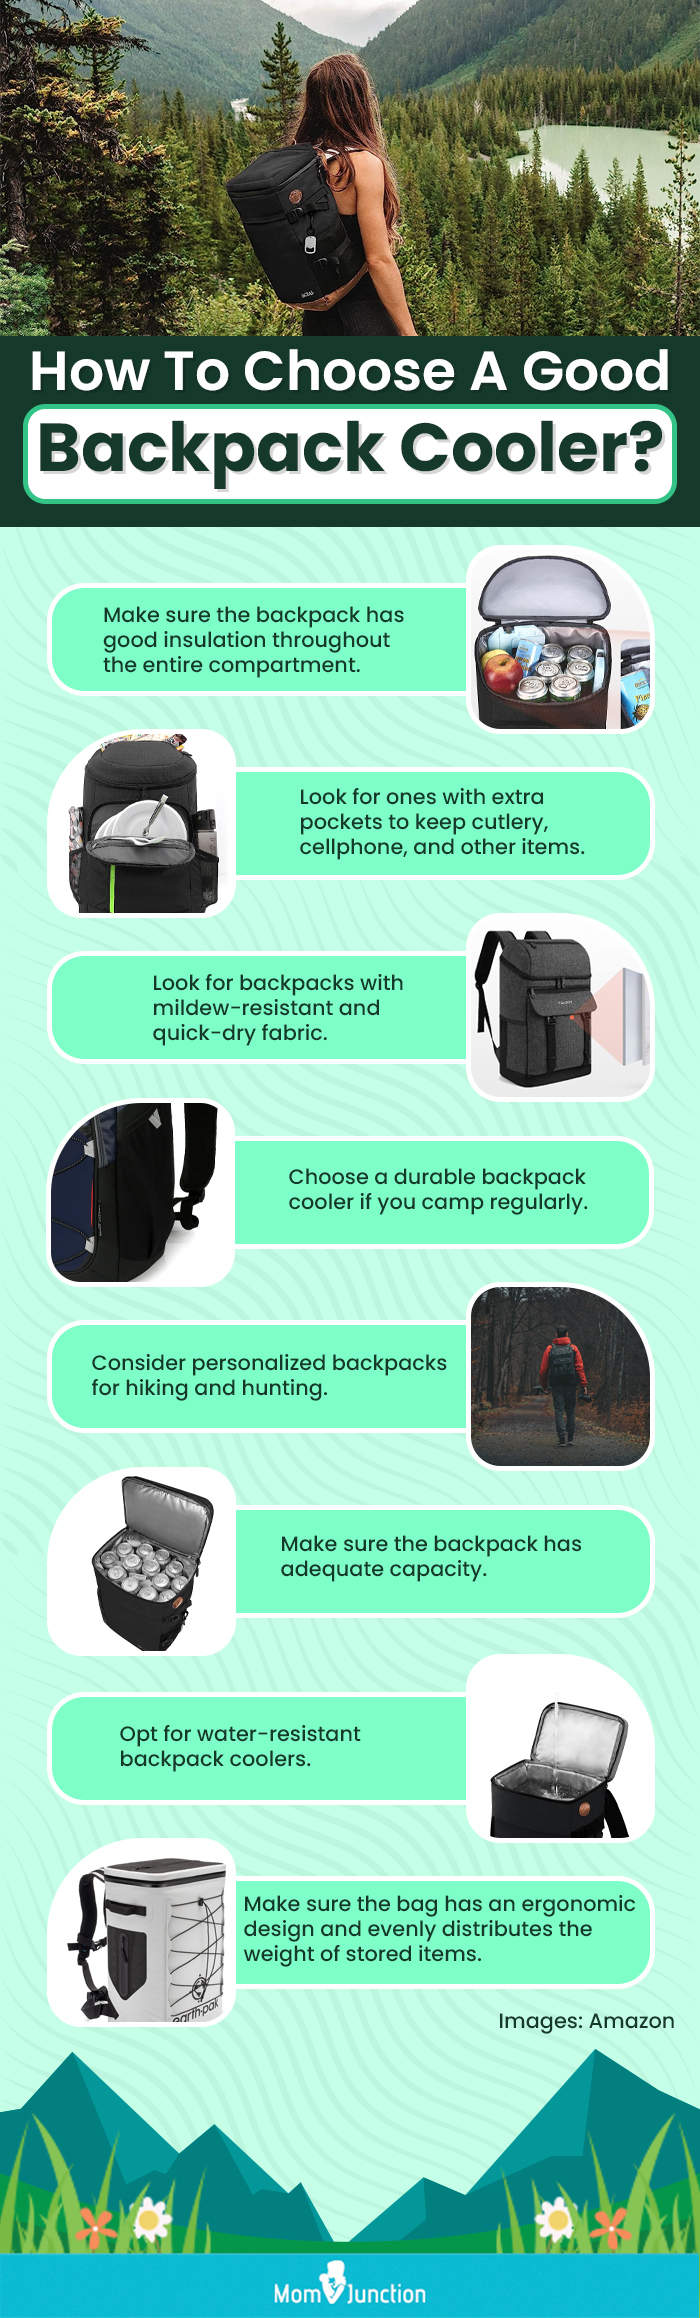 How To Choose A Good Backpack Cooler (infographic)